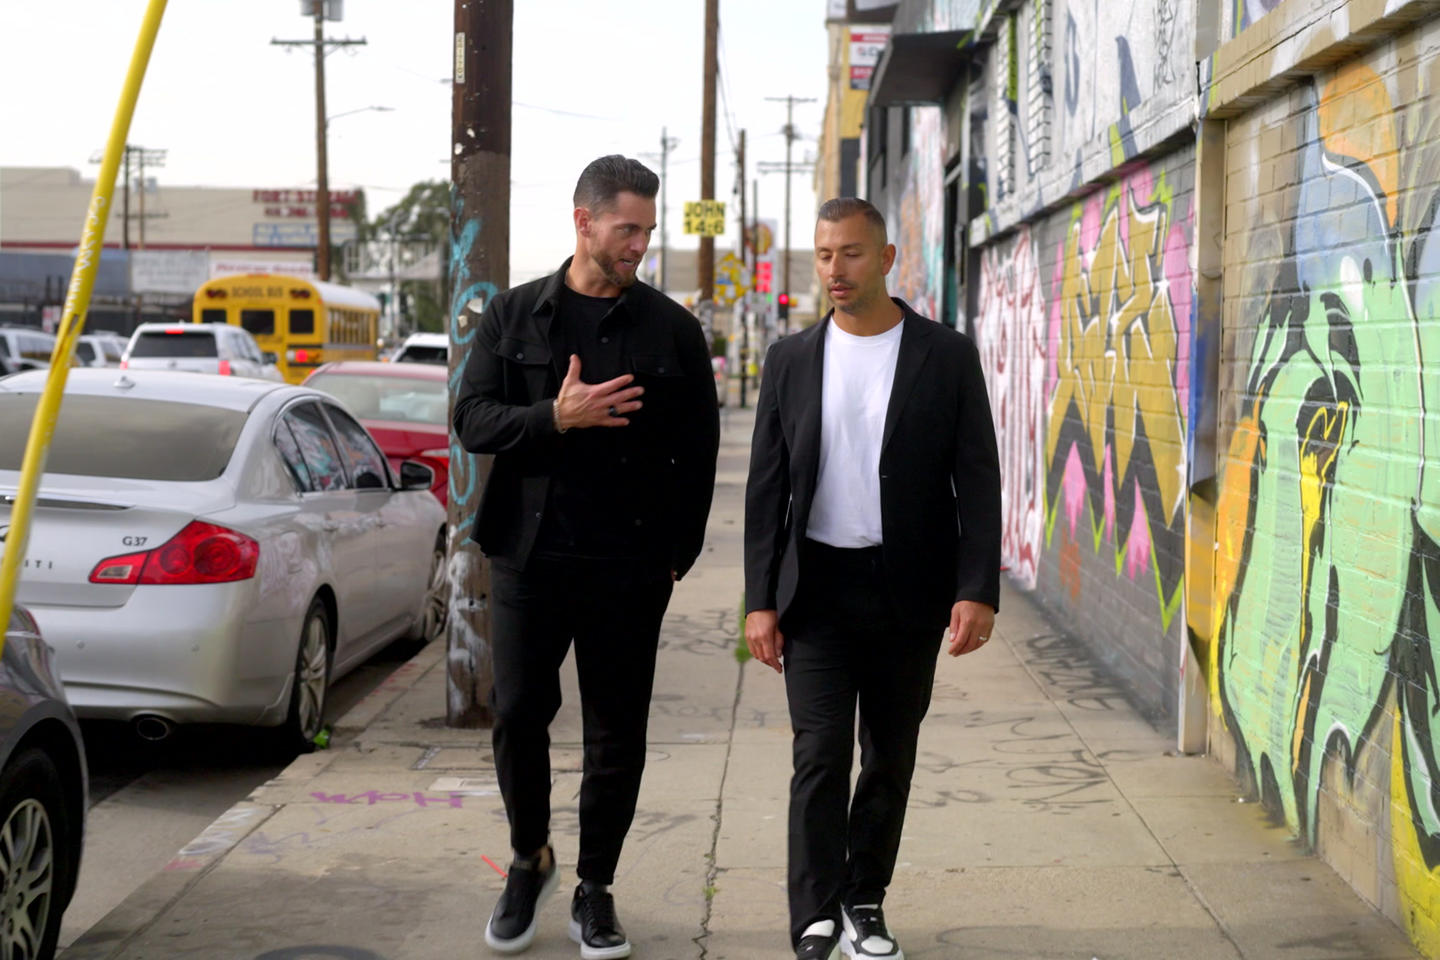 Two men walking and conversing on a graffiti-lined street with parked cars and a school bus in the background.